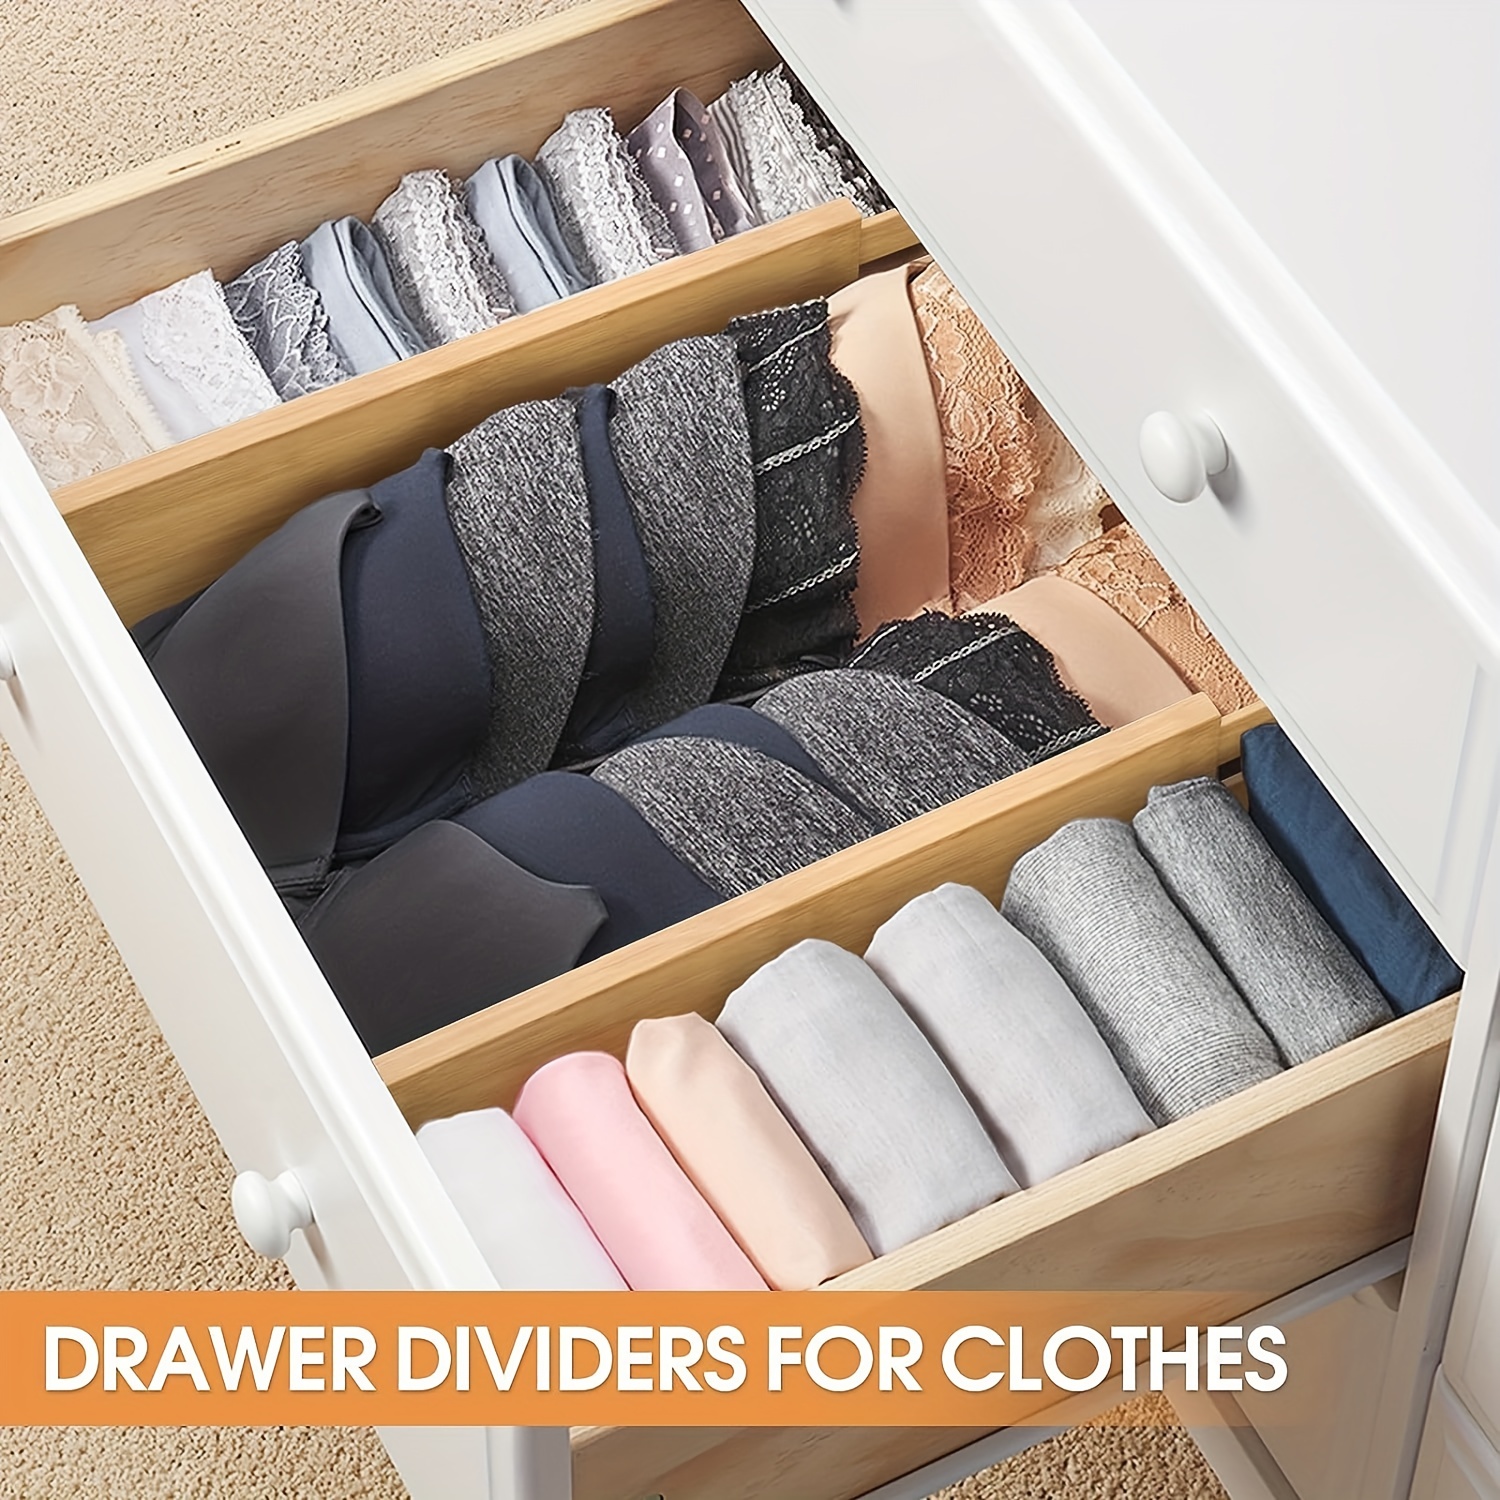 Craft Wood Adjustable Bamboo Drawer Dividers Organizers - Expandable Drawer